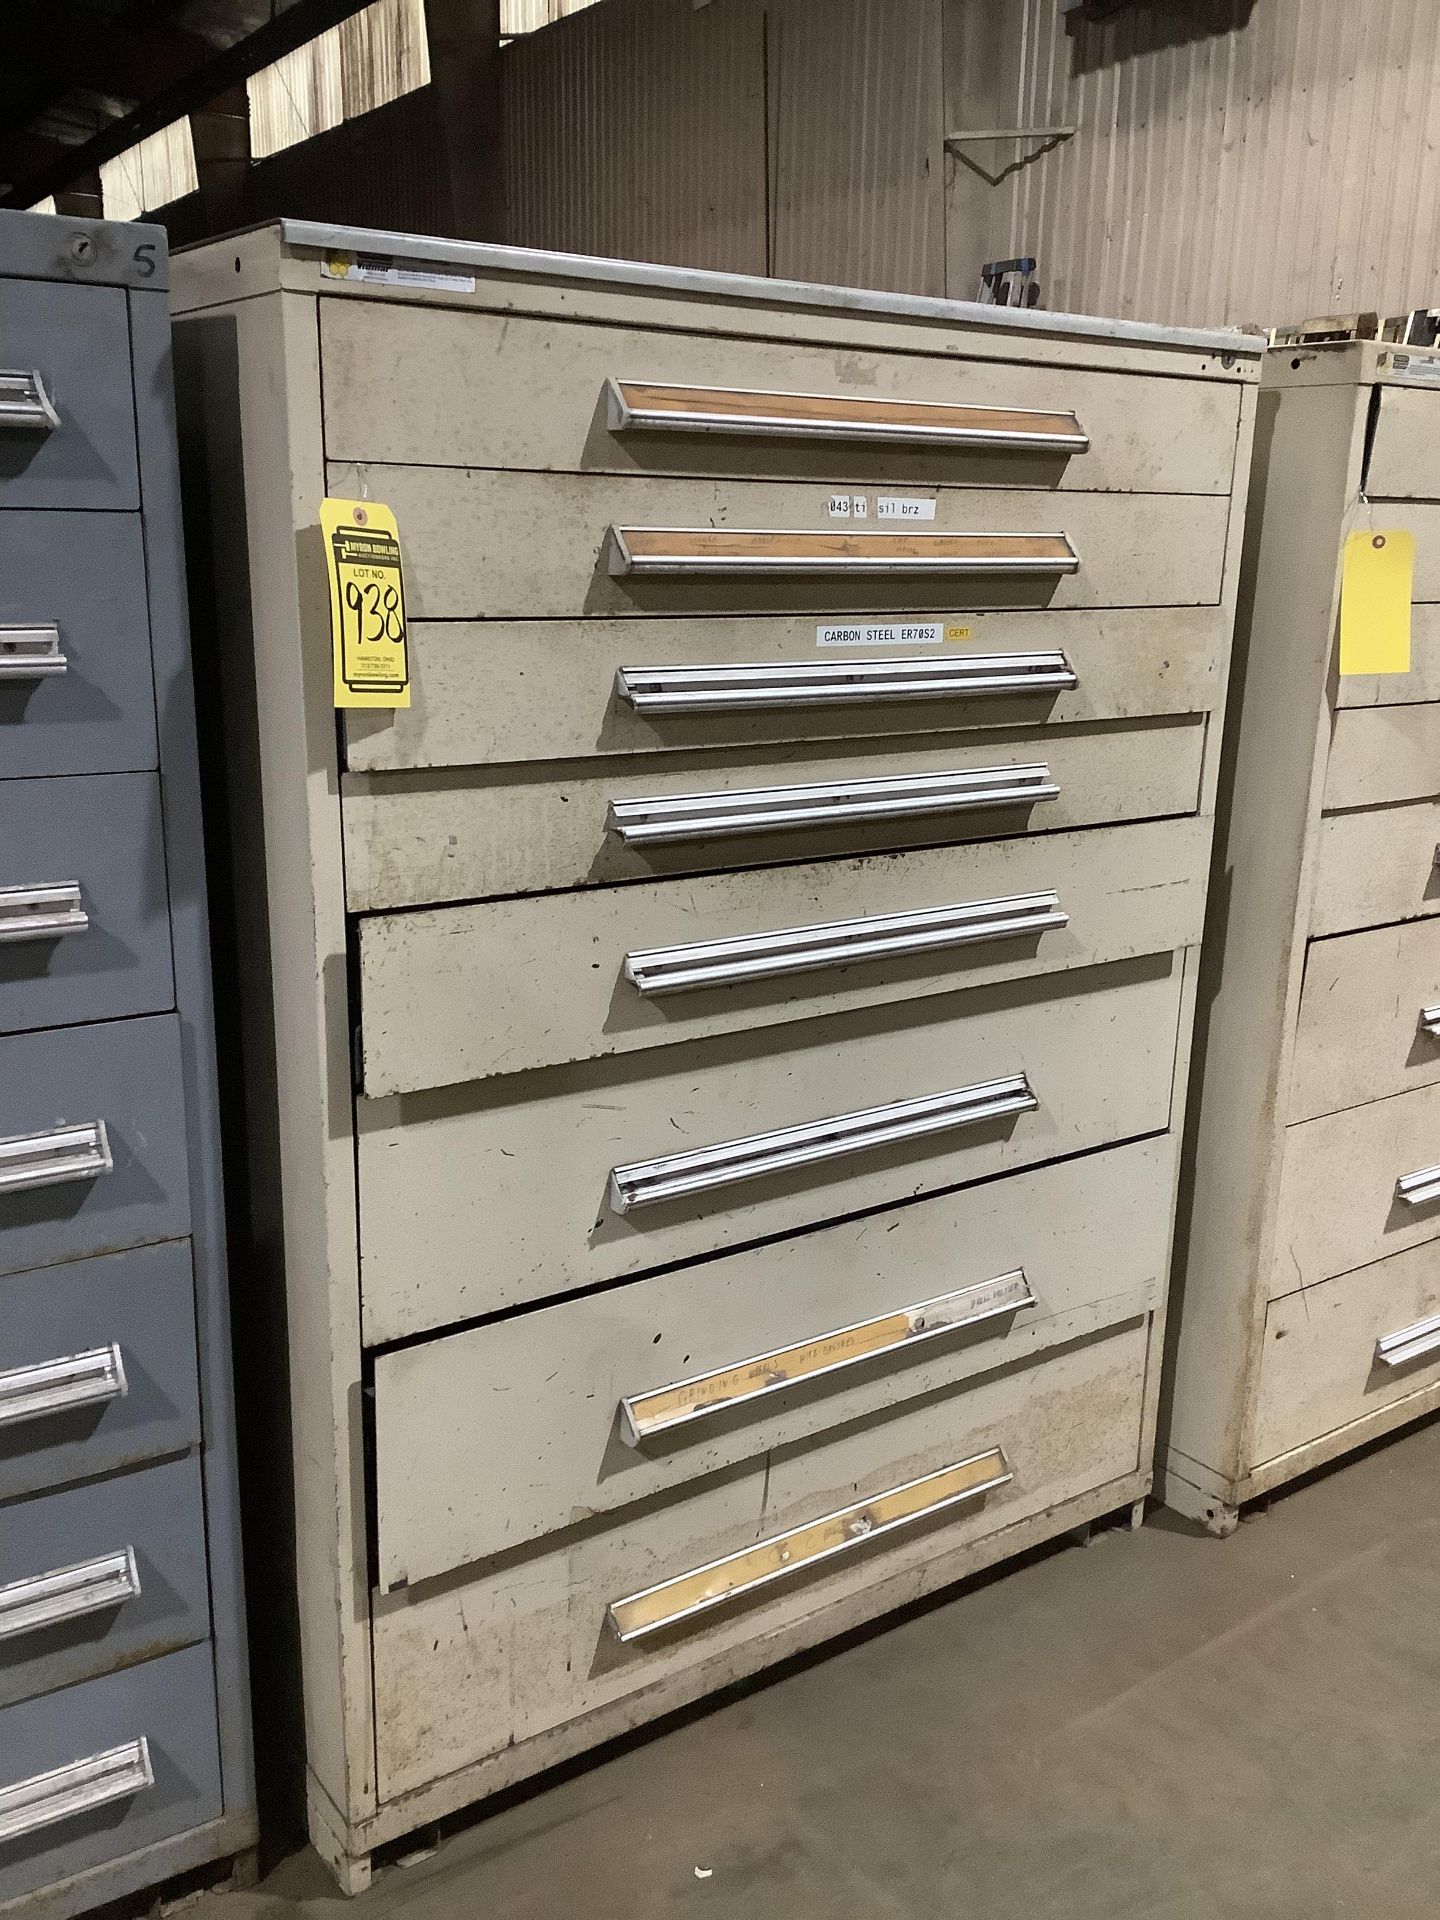 45” WIDE STANLEY VIDMAR 8 DRAWER INDUSTRIAL STORAGE CABINET WITH CONTENTS - Image 2 of 5